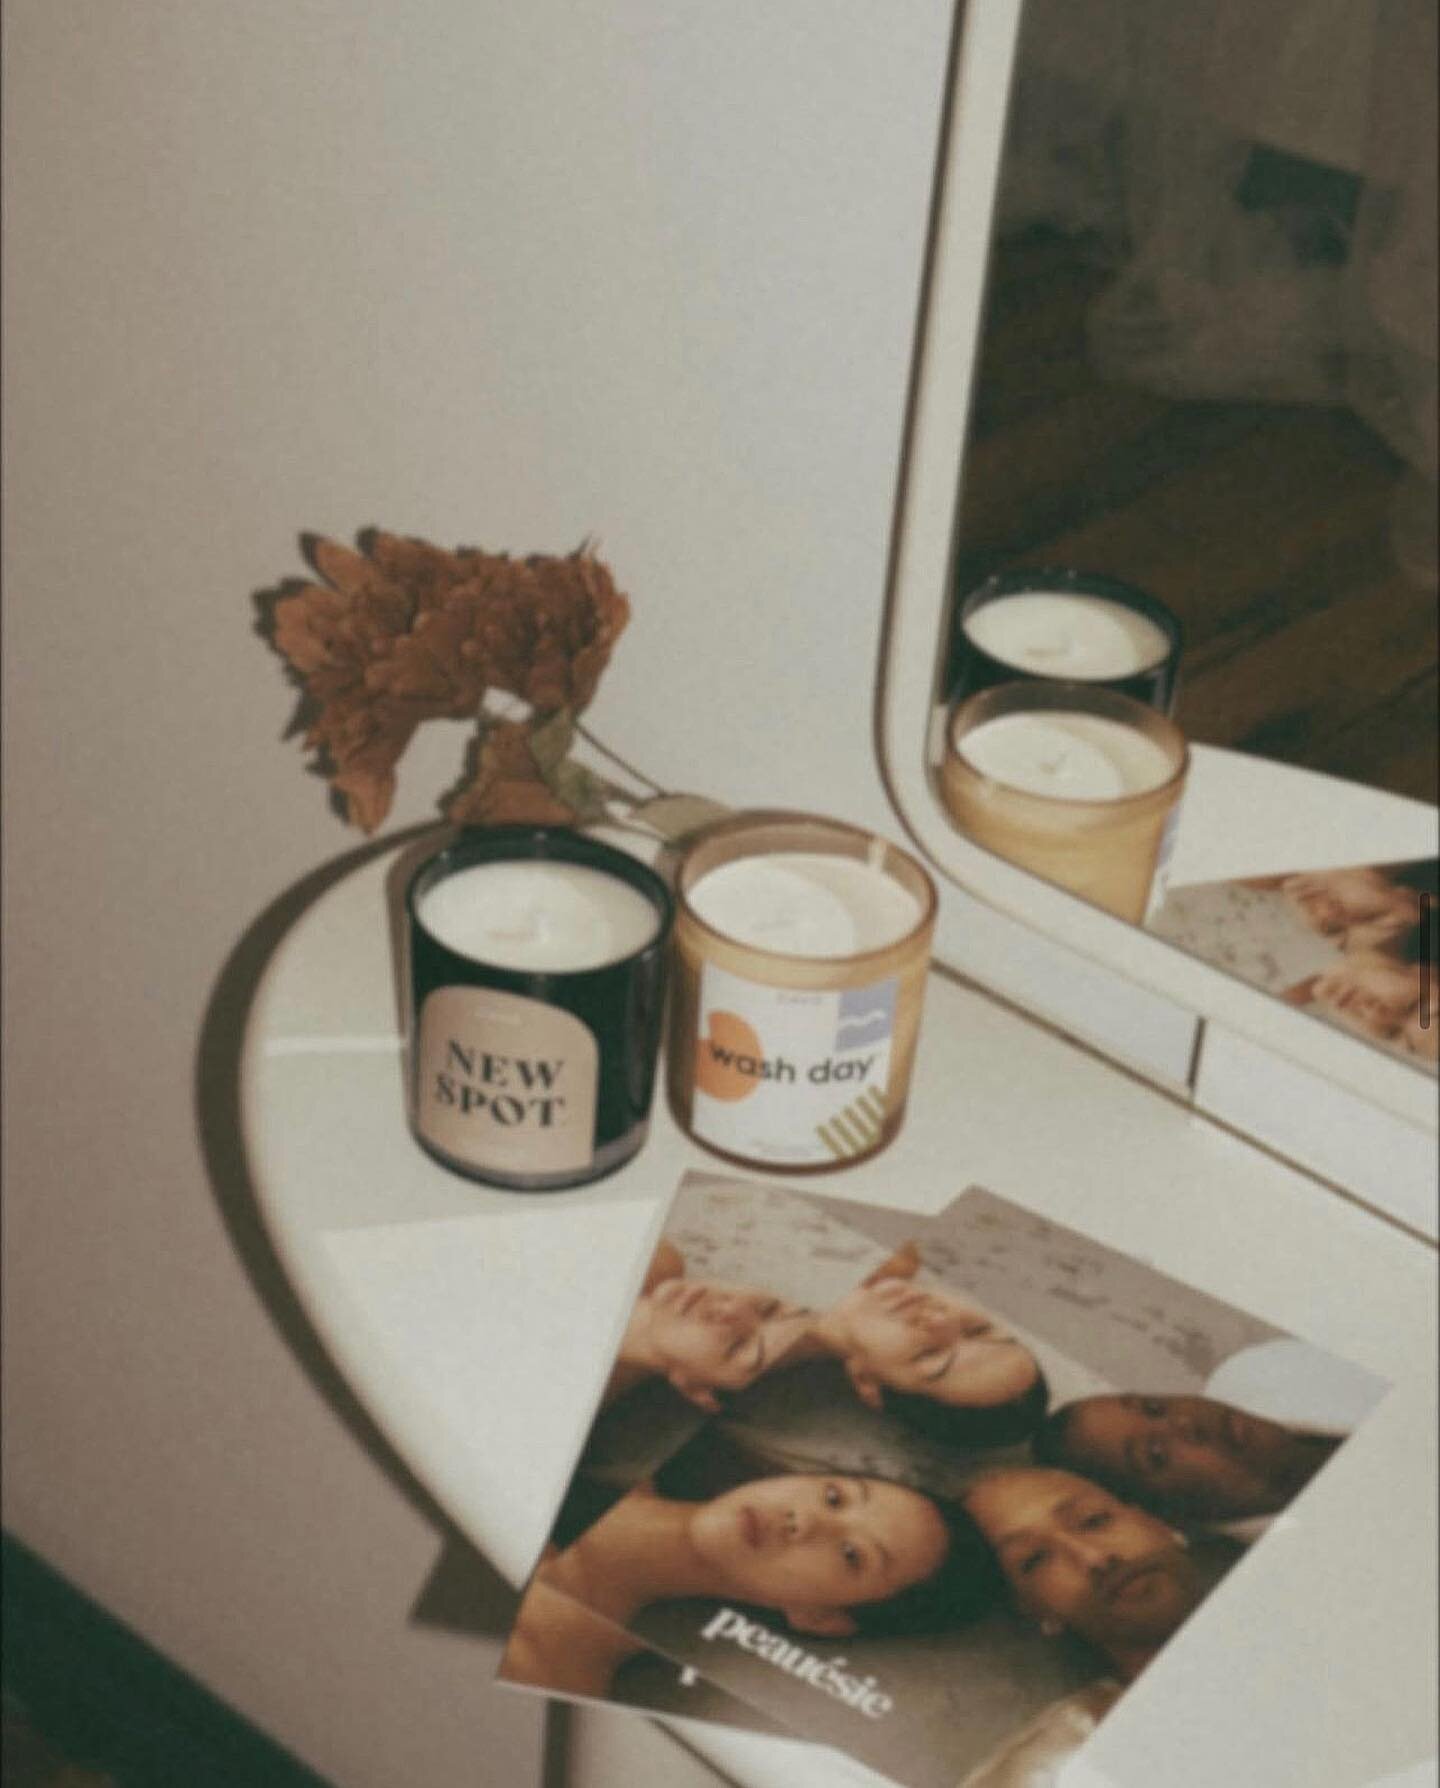 Fun fact ✨ You can shop all CAVO staples + the new &ldquo;Skin Poetry&rdquo; candle in-spa at @peauesie.inc Montreal! 

📸: @peauesie.inc @desseydoll 

&bull;
&bull;
&bull;

#shopcavo #peauesiemtl #skincarecommunity #homefragrances #scentedcandle #sp